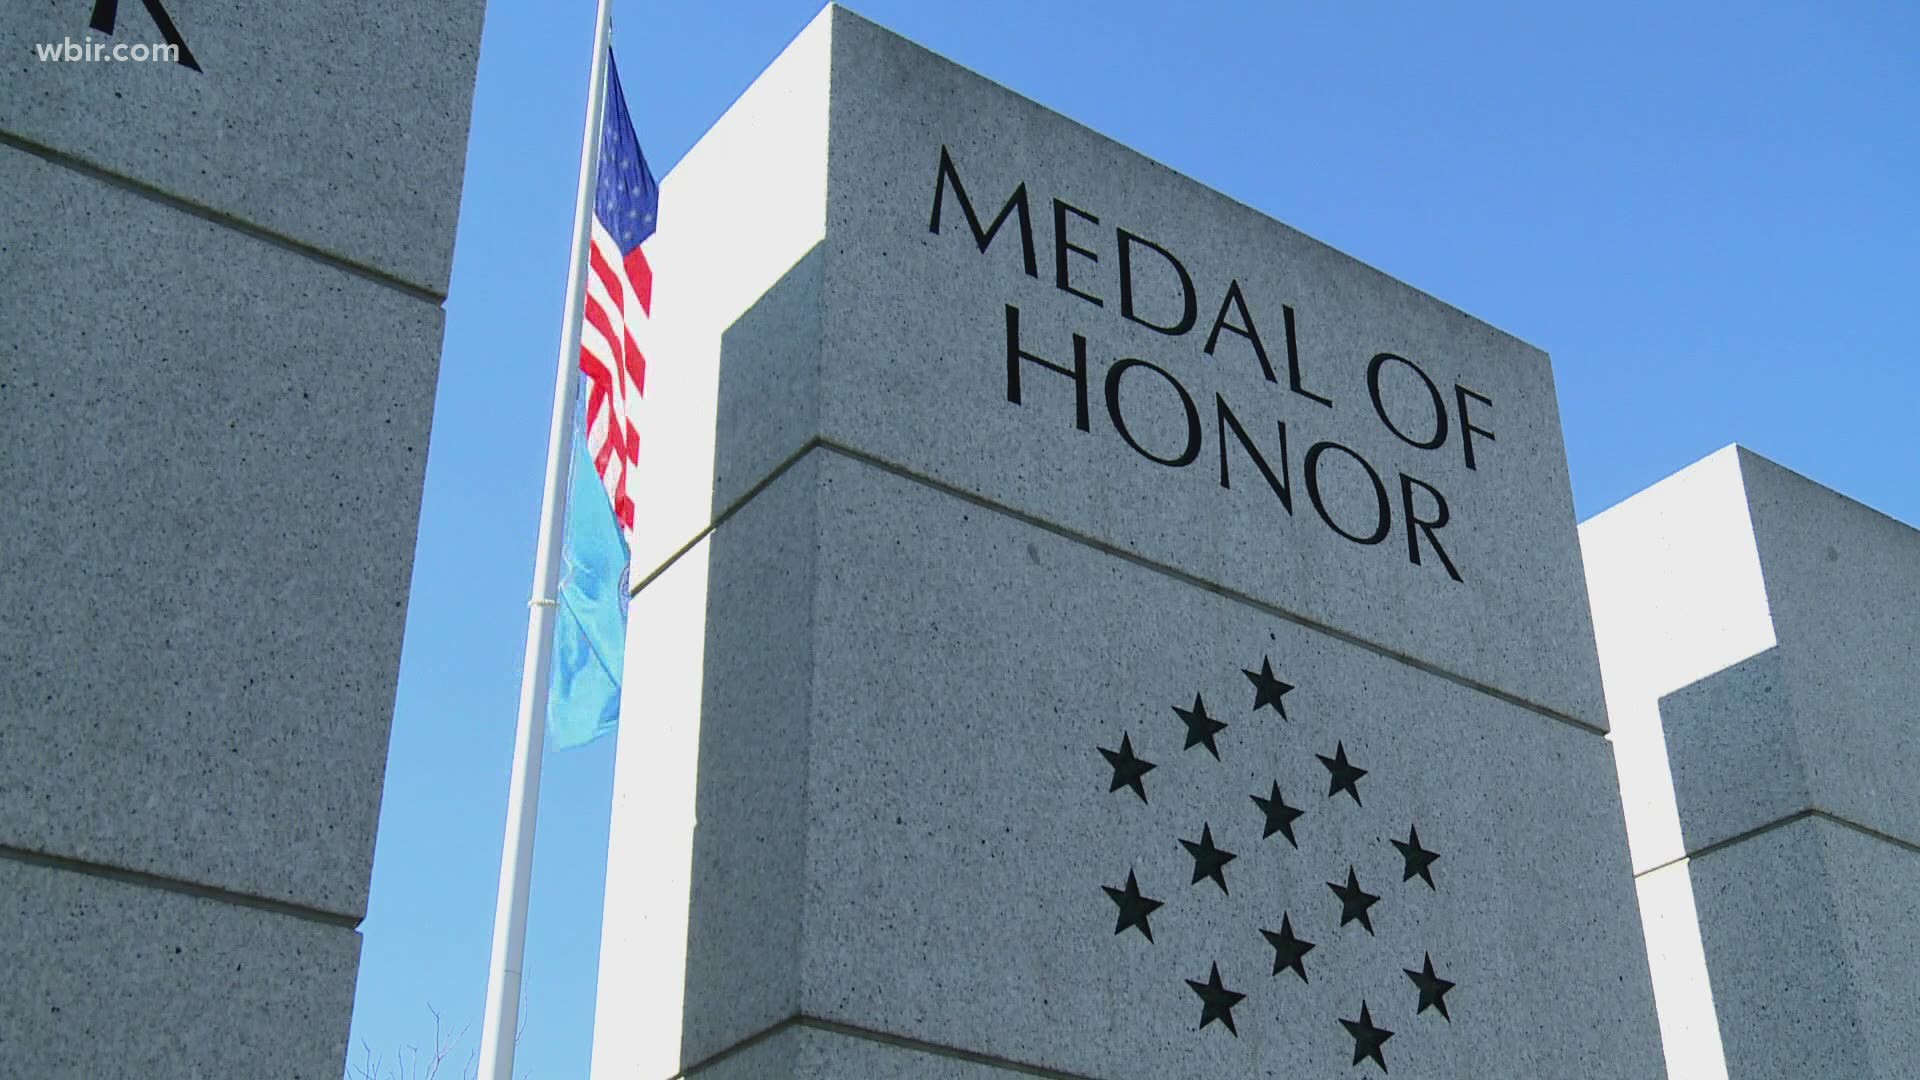 The most honored U.S. veterans will return to Knoxville for the Medal of Honor Convention. Col. Jack Jacobs was one of them. He looks forward to returning.